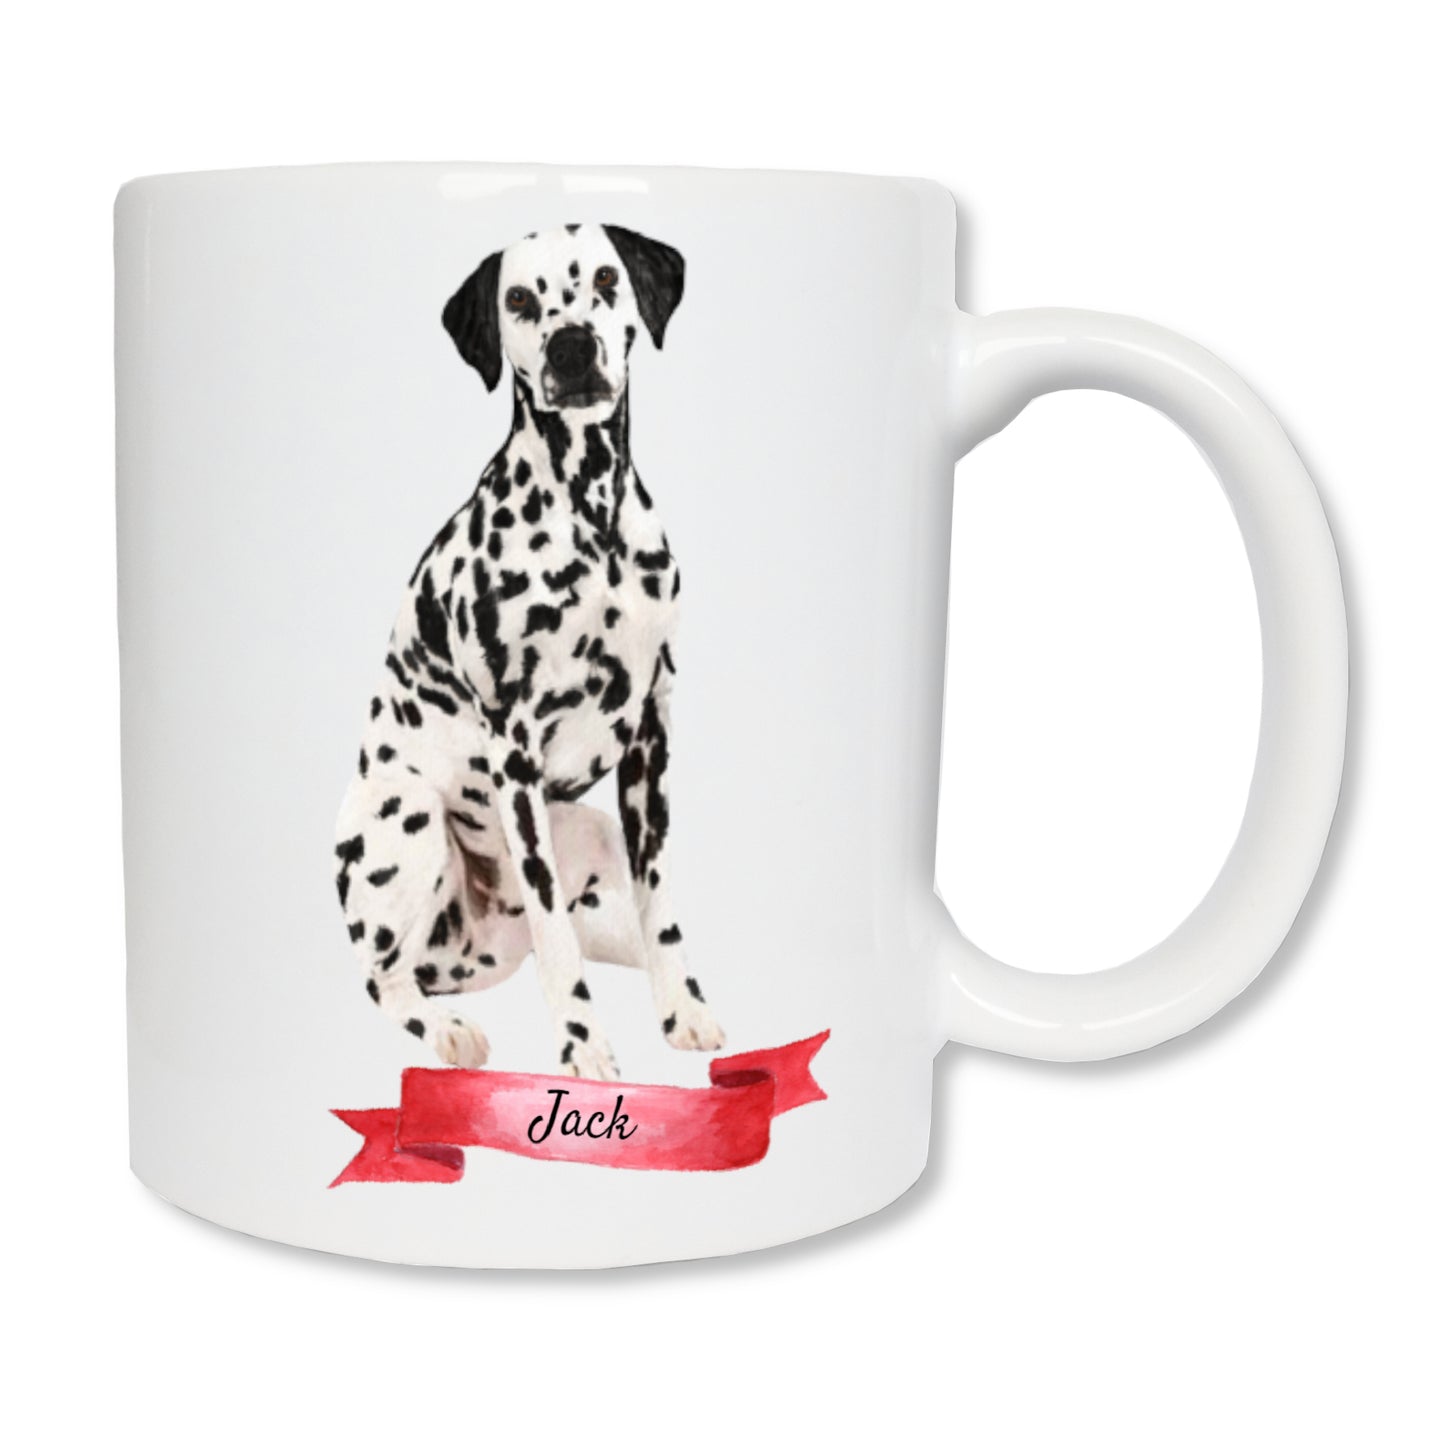 Personalized Dalmatian dog mug and his first name